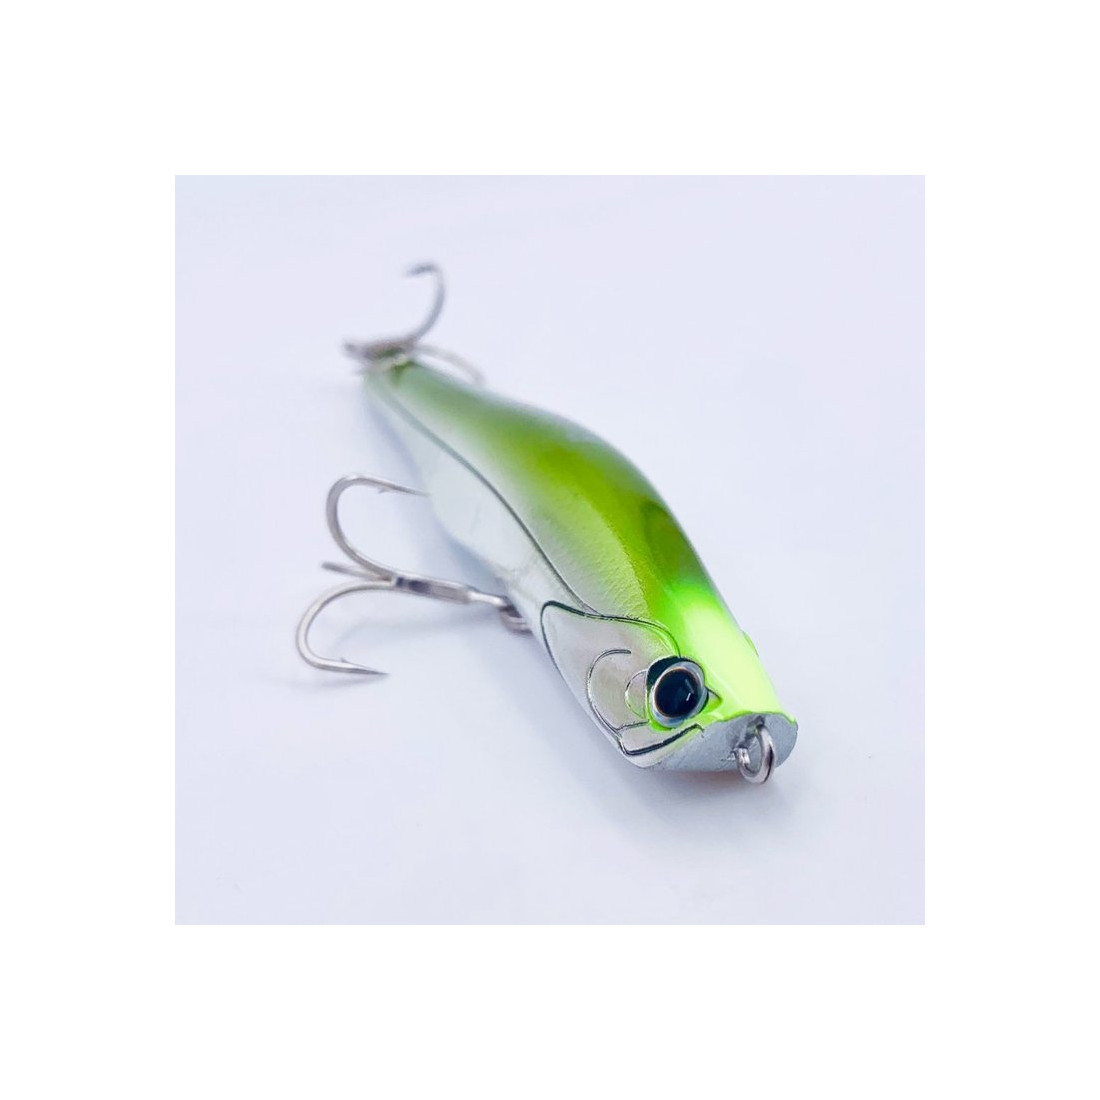 Tackle House Resitance Morkyn Lures